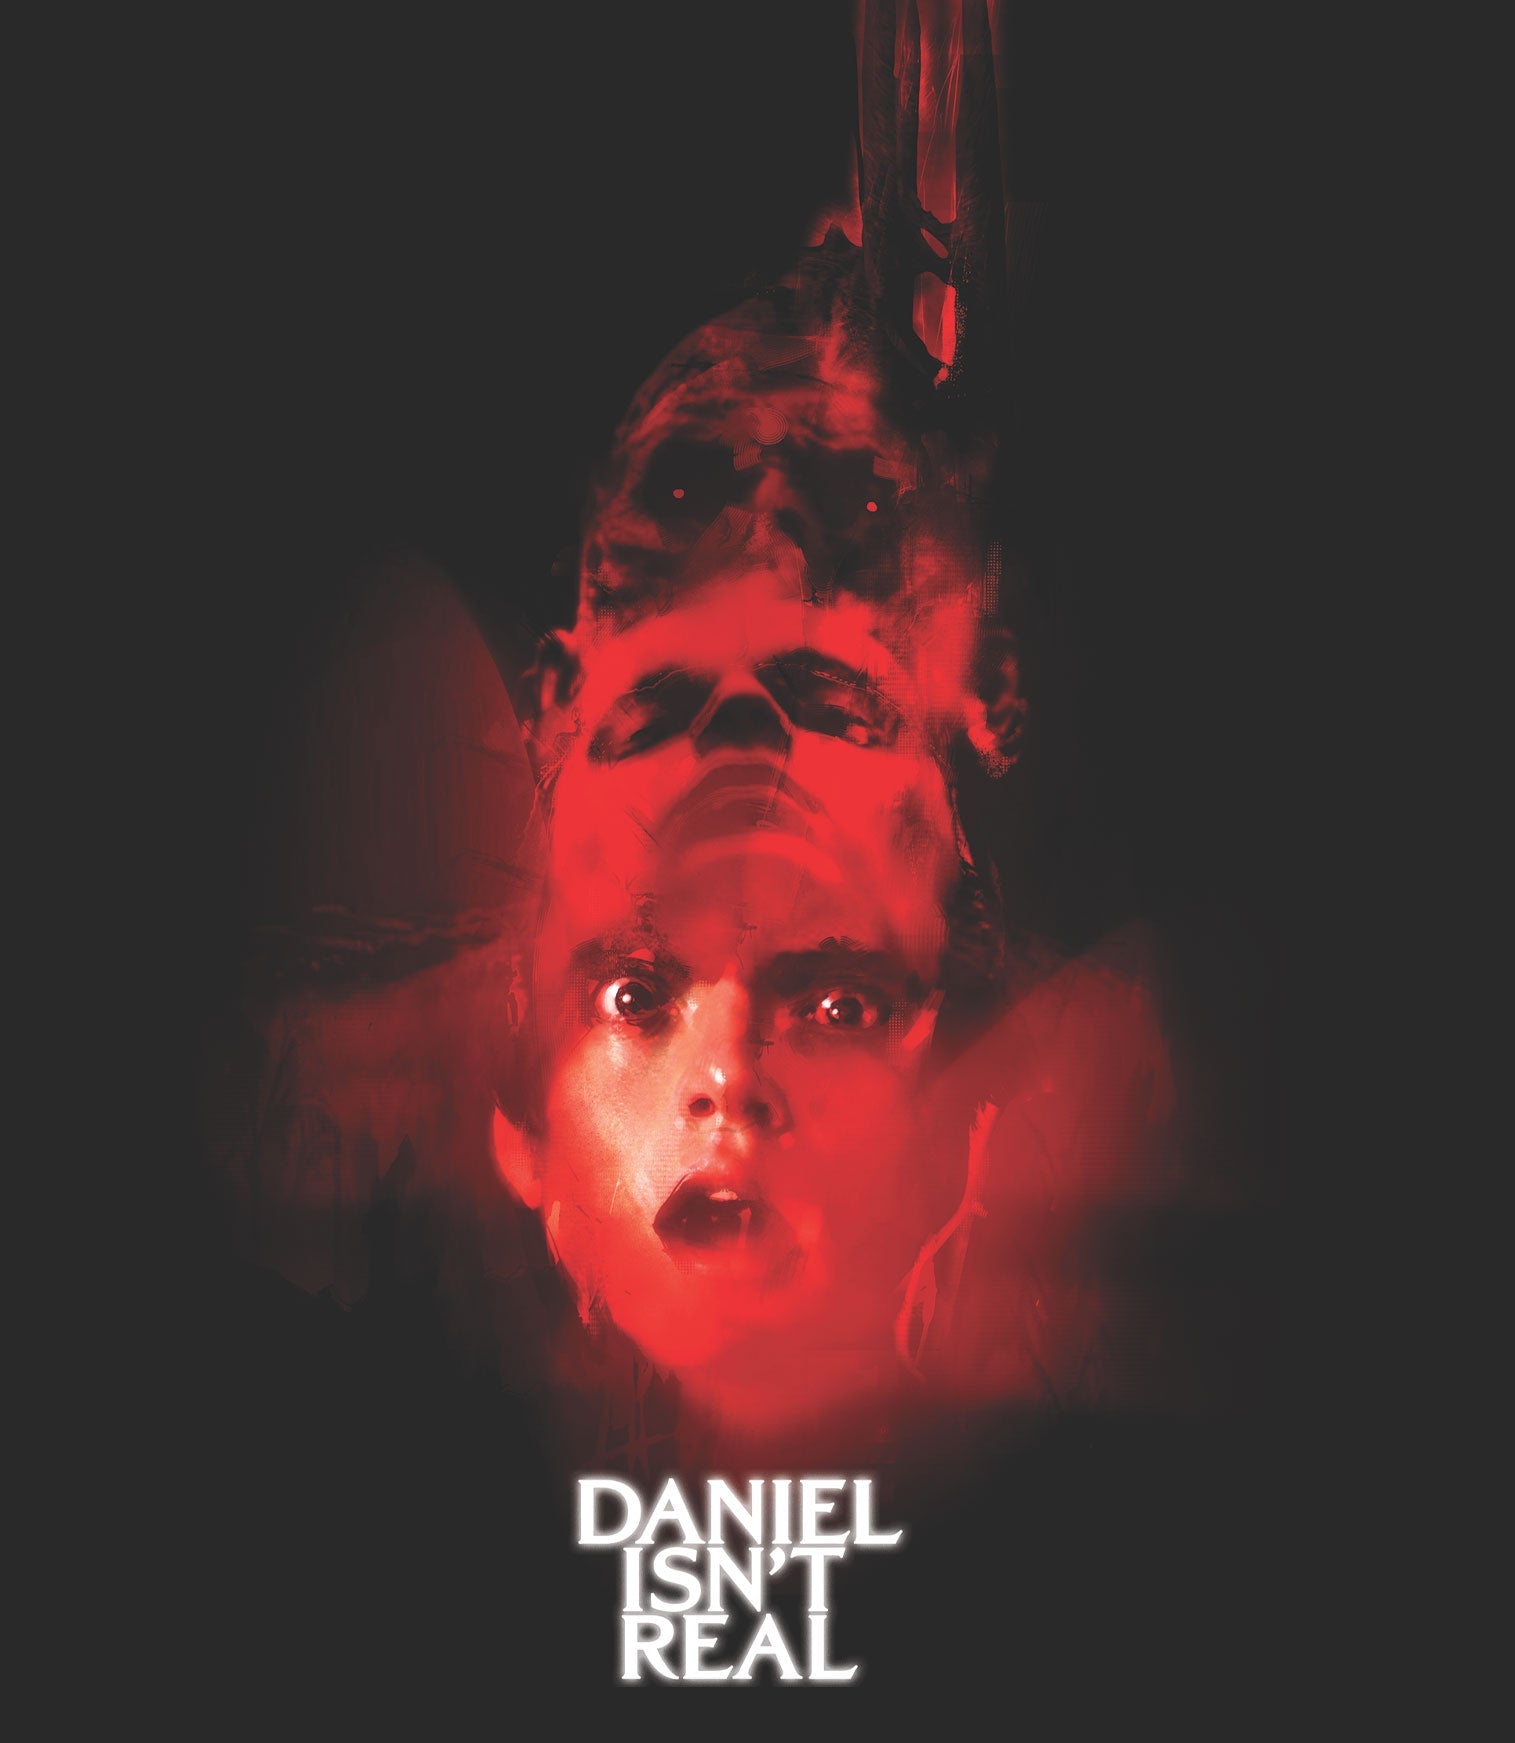 DANIEL ISN'T REAL (LIMITED EDITION) BLU-RAY [PRE-ORDER]